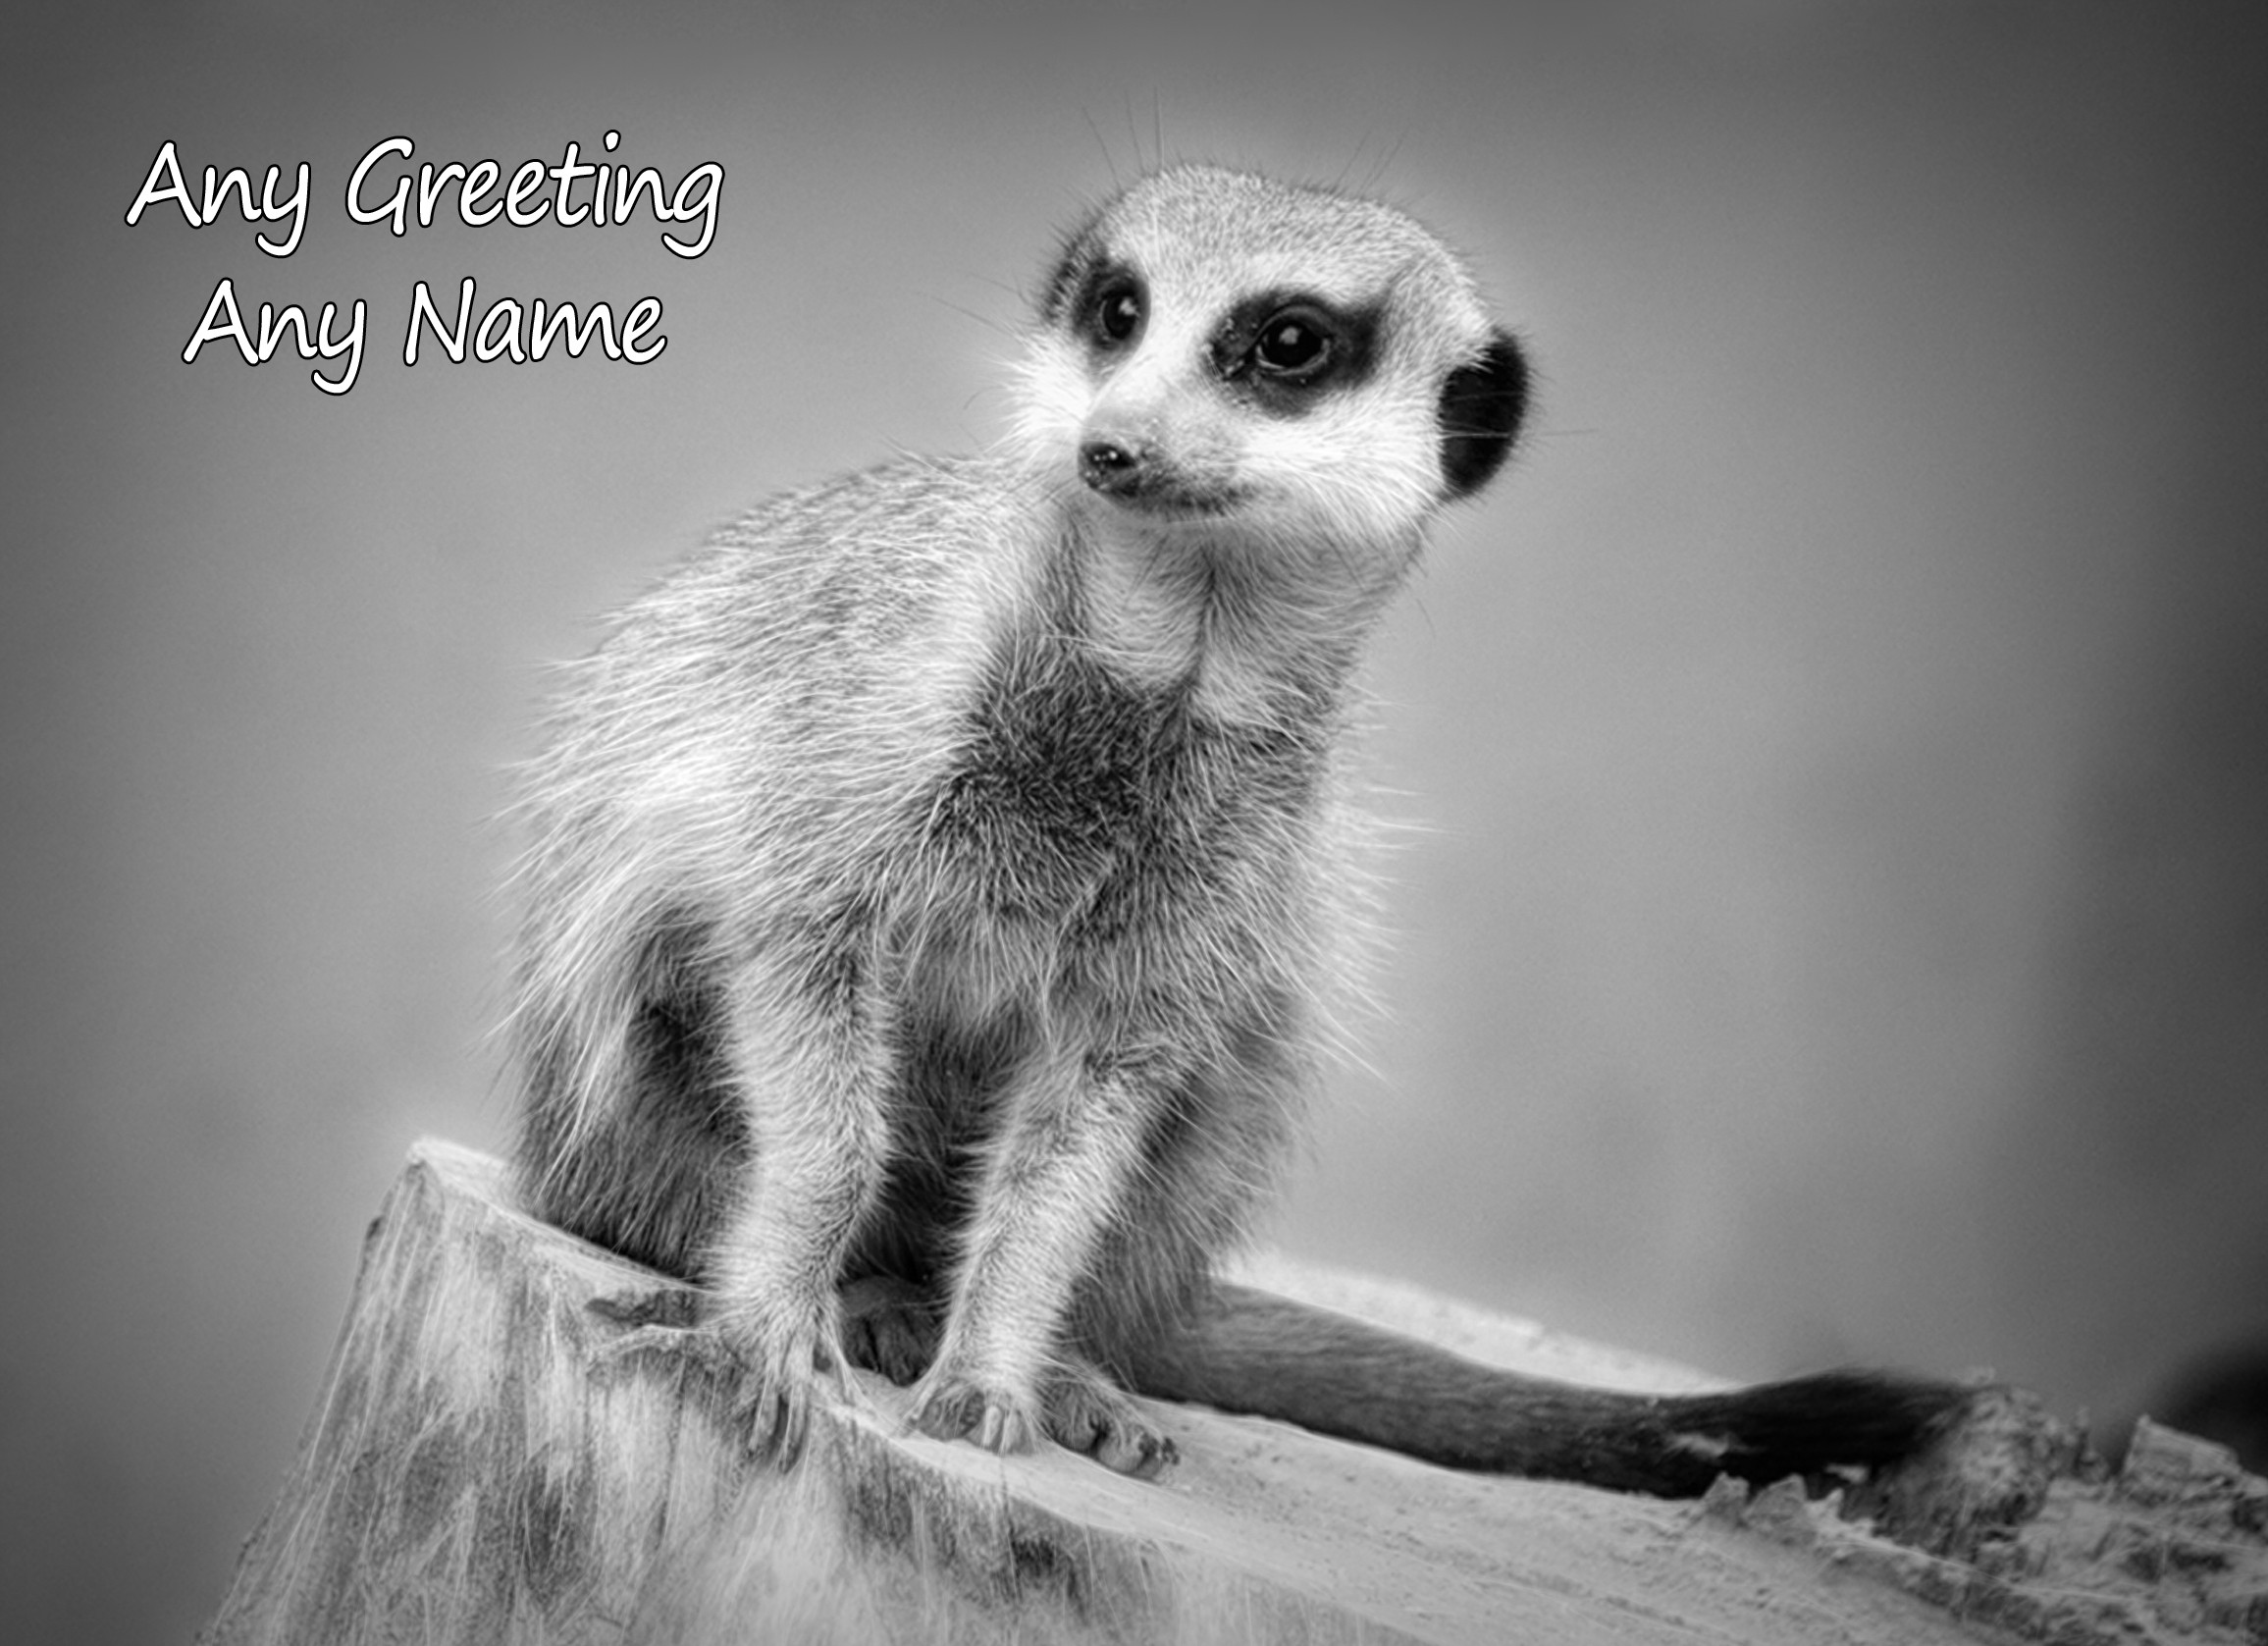 Personalised Meerkat Black and White Art Greeting Card (Birthday, Christmas, Any Occasion)